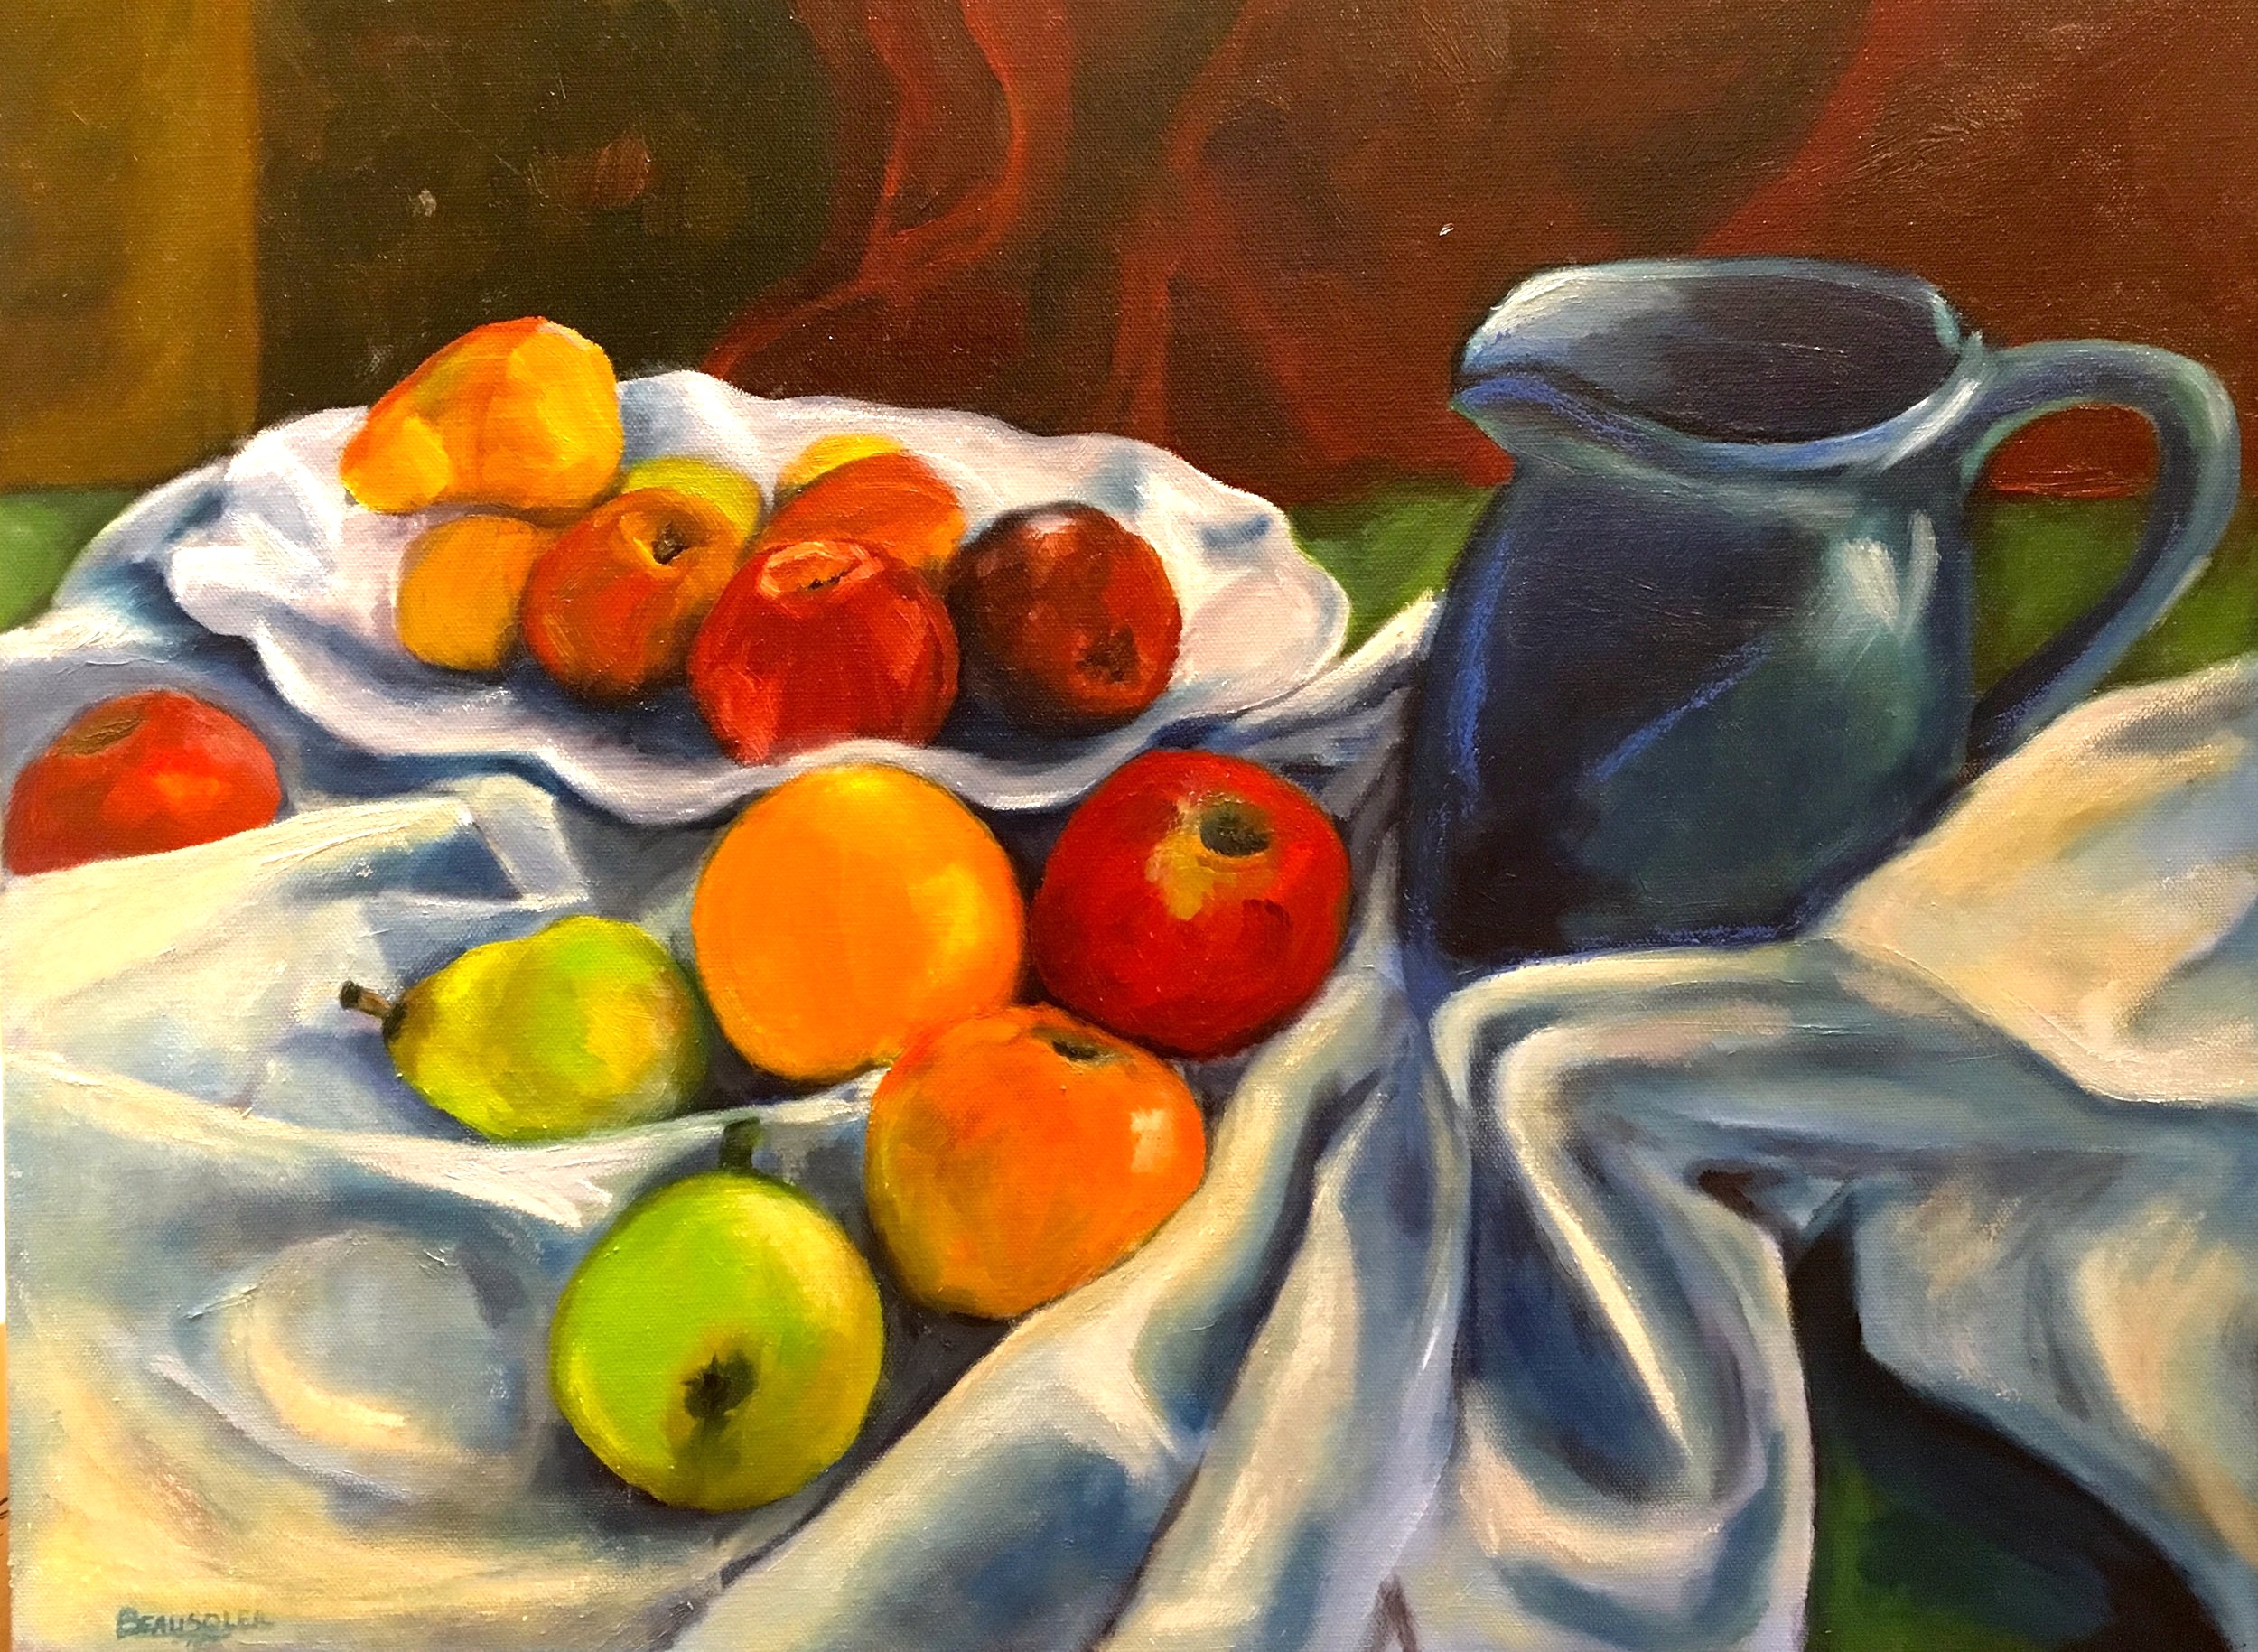 Fruit with cloth and Blue pitcher, 2017